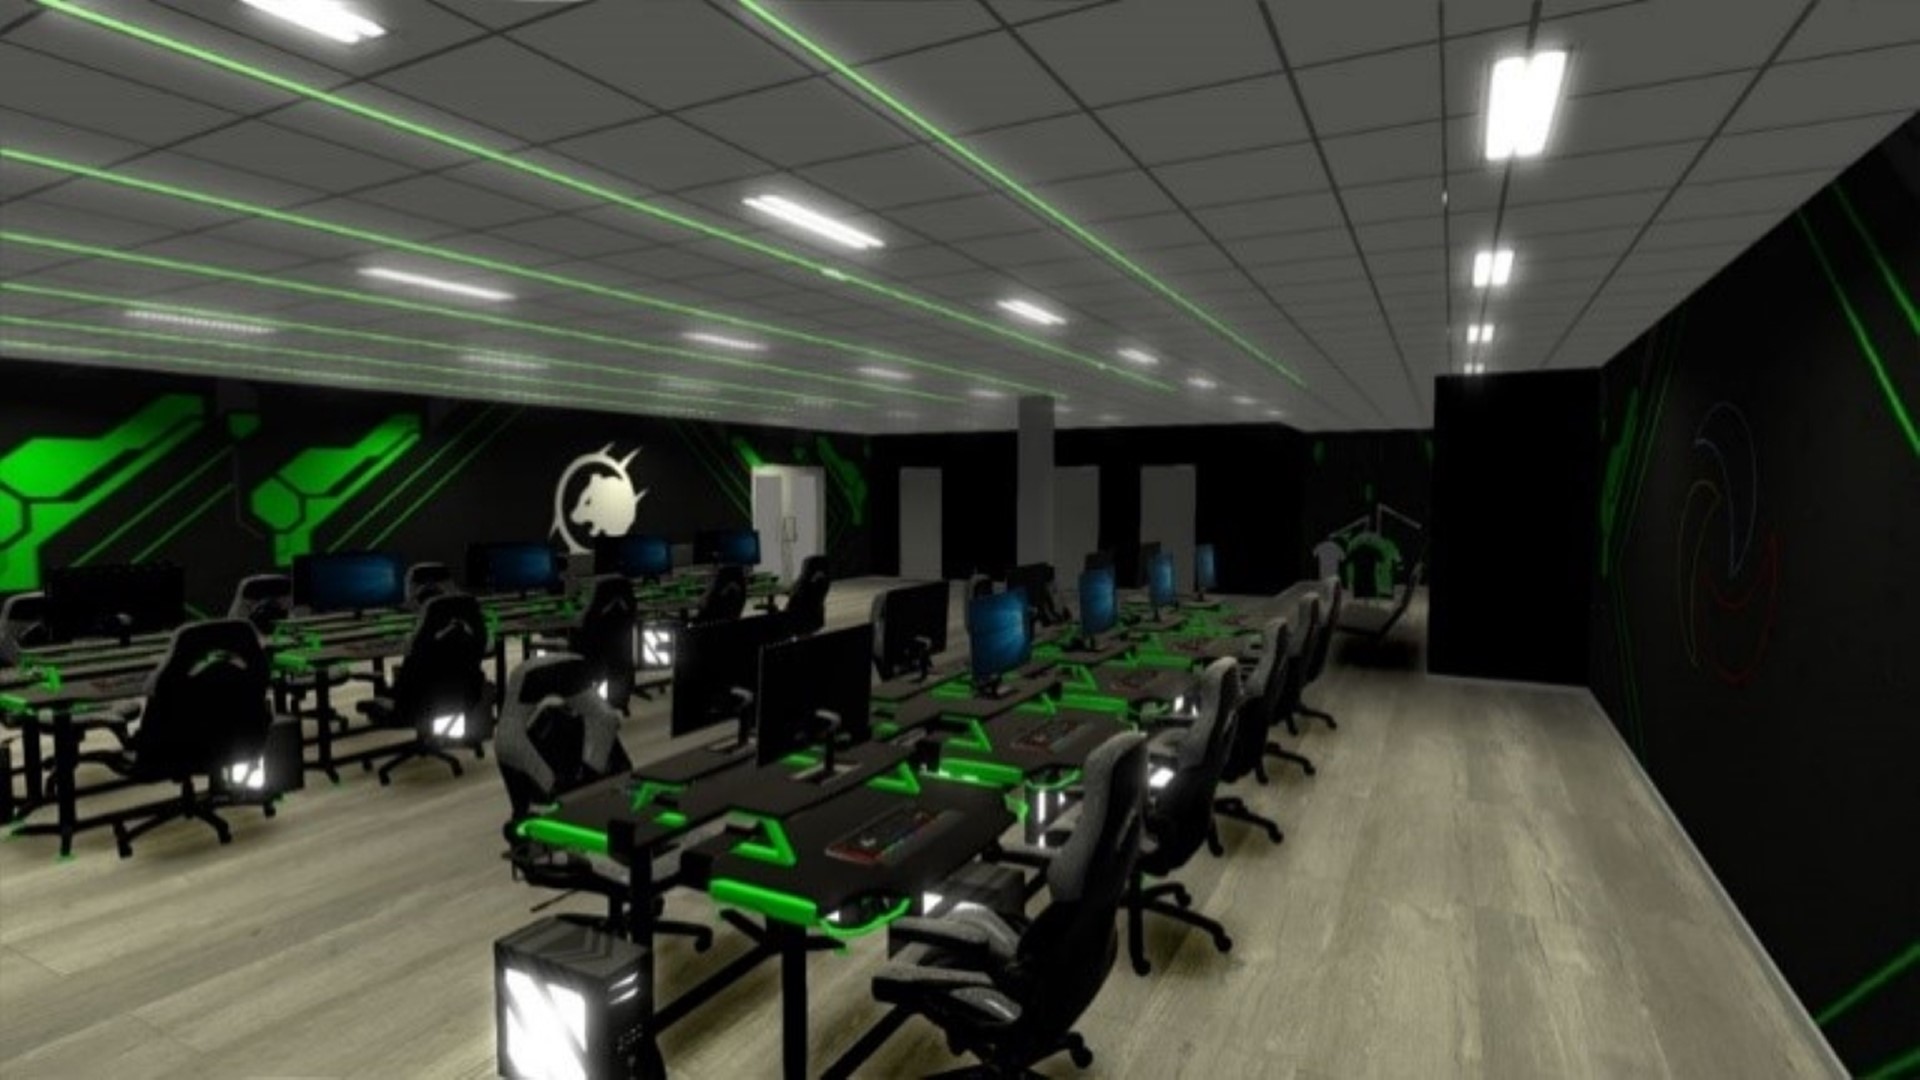 The City of Carrollton says an esports center will be opening up inside a rec center, where residents can play, socialize and compete in tournaments.